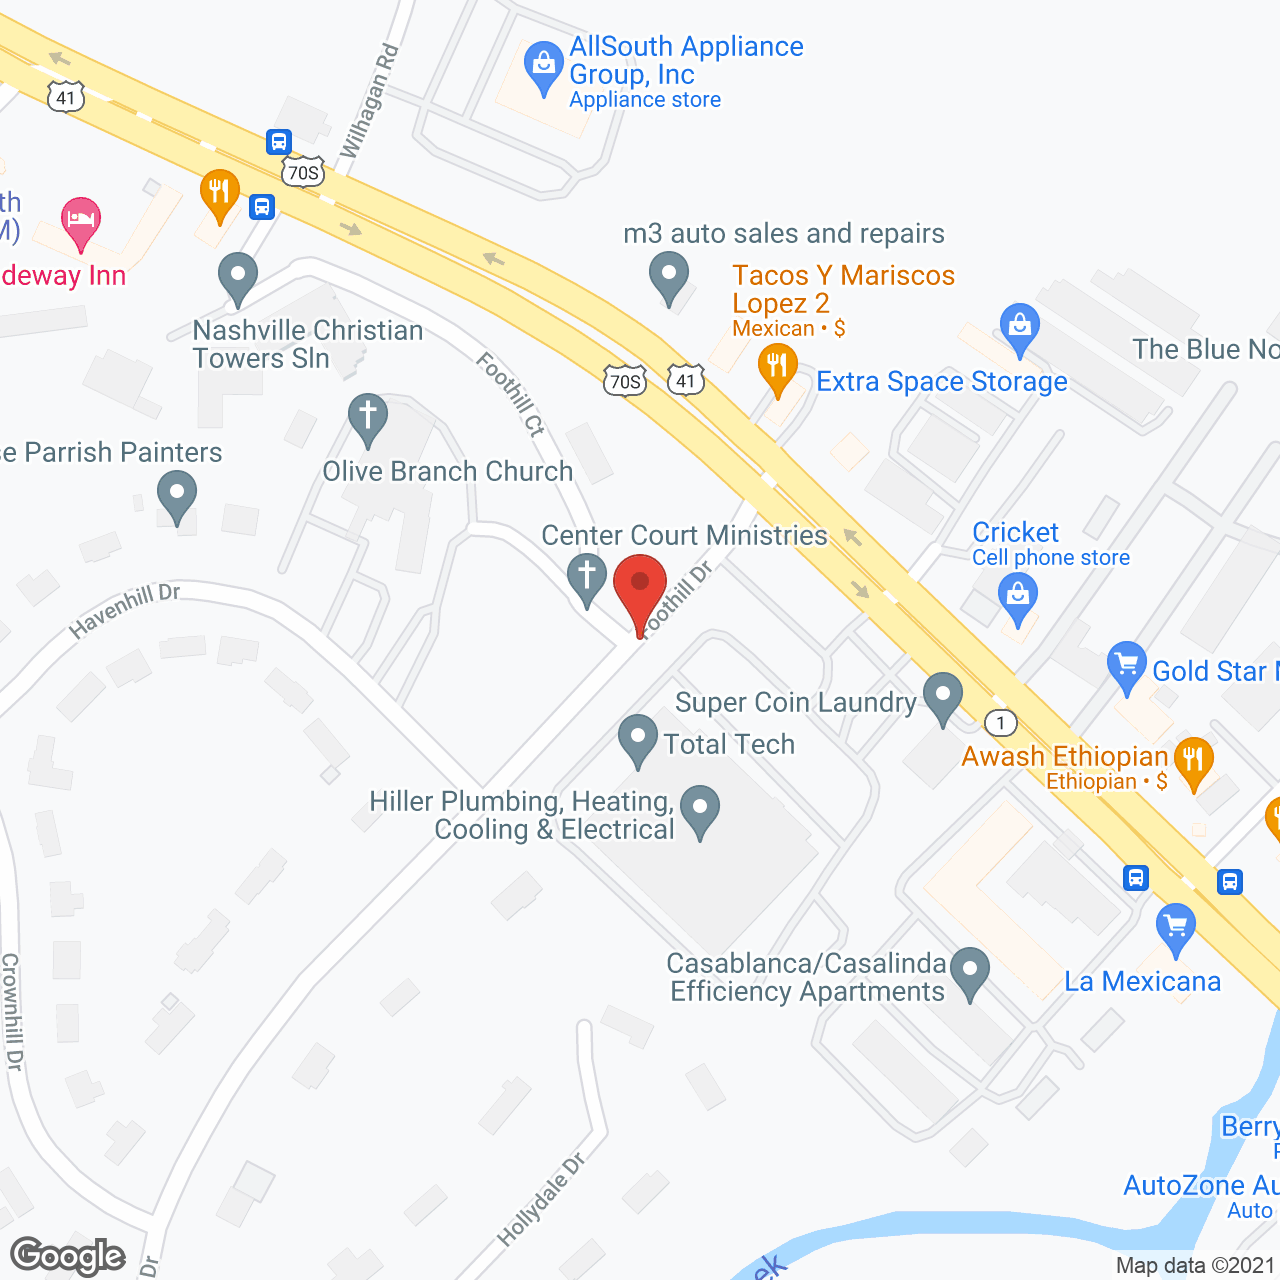 Nashville Christian Towers,  Inc. in google map